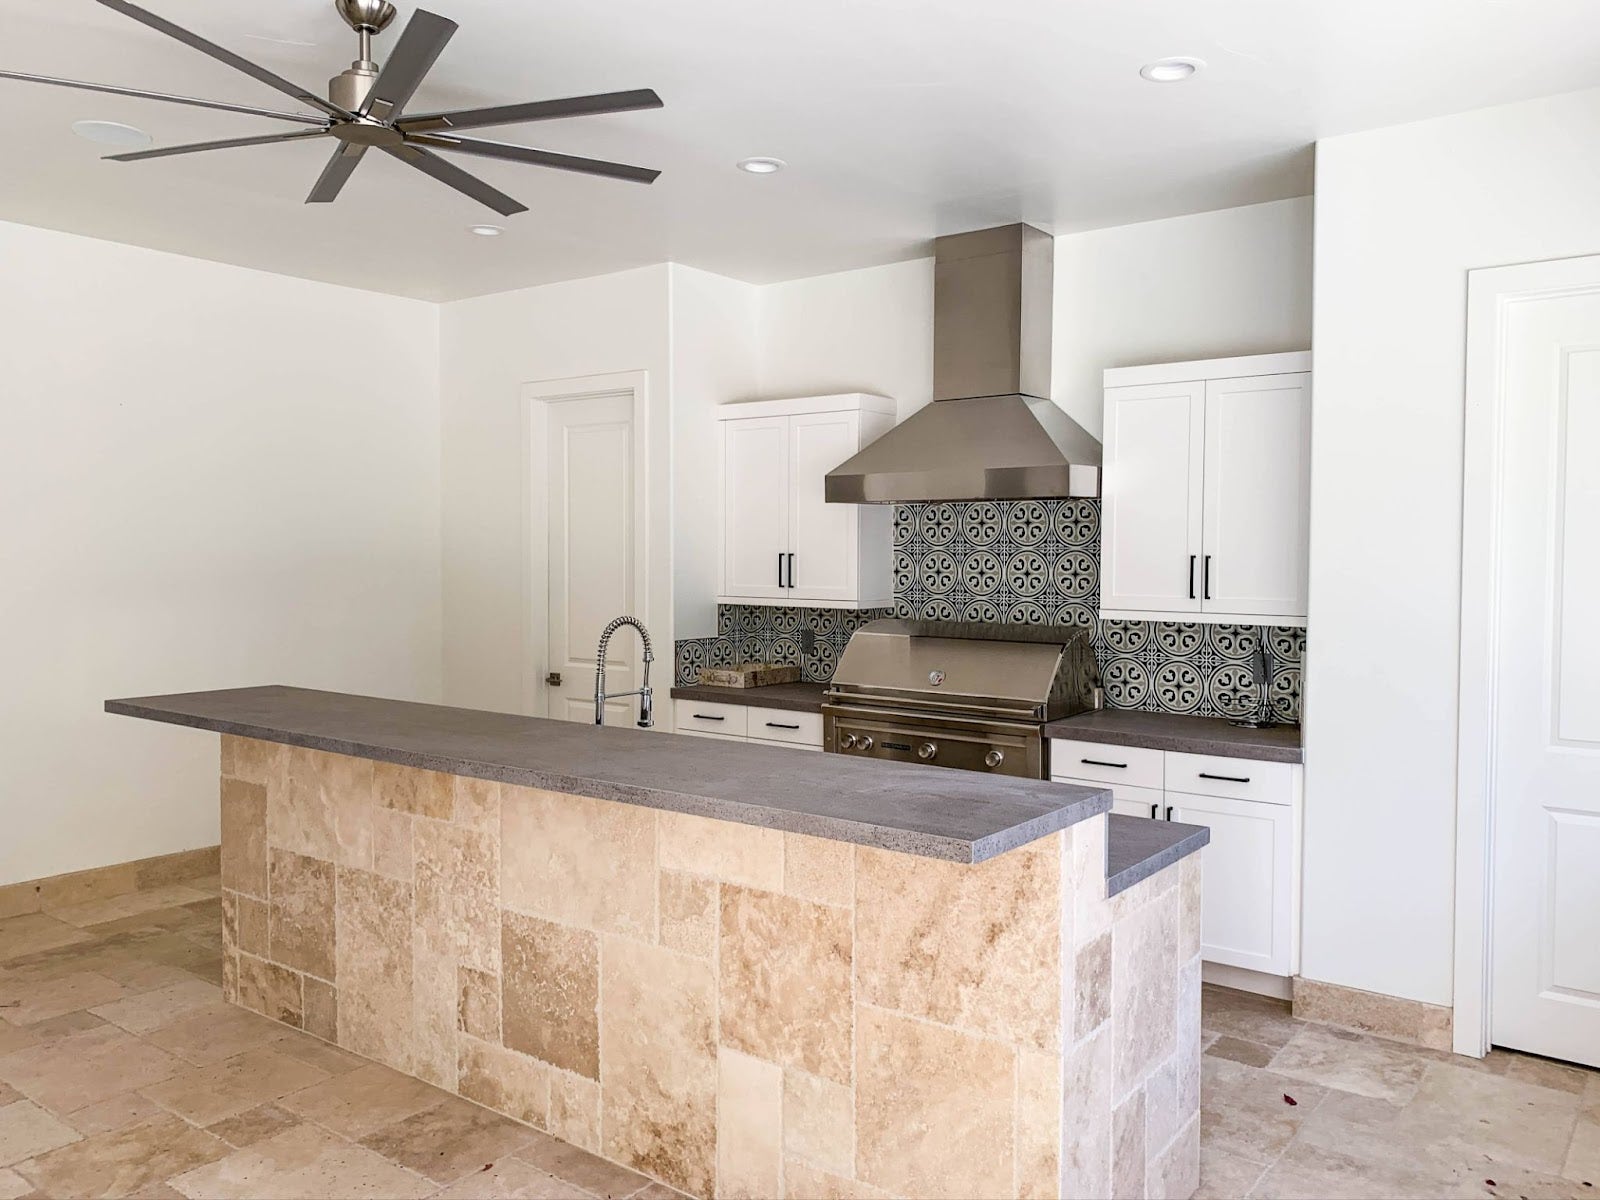 Airy kitchen interior with high ceilings, complete with a Proline range hood, contrasting patterned backsplash, and an elegant island with seating space - prolinerangehoods.com.